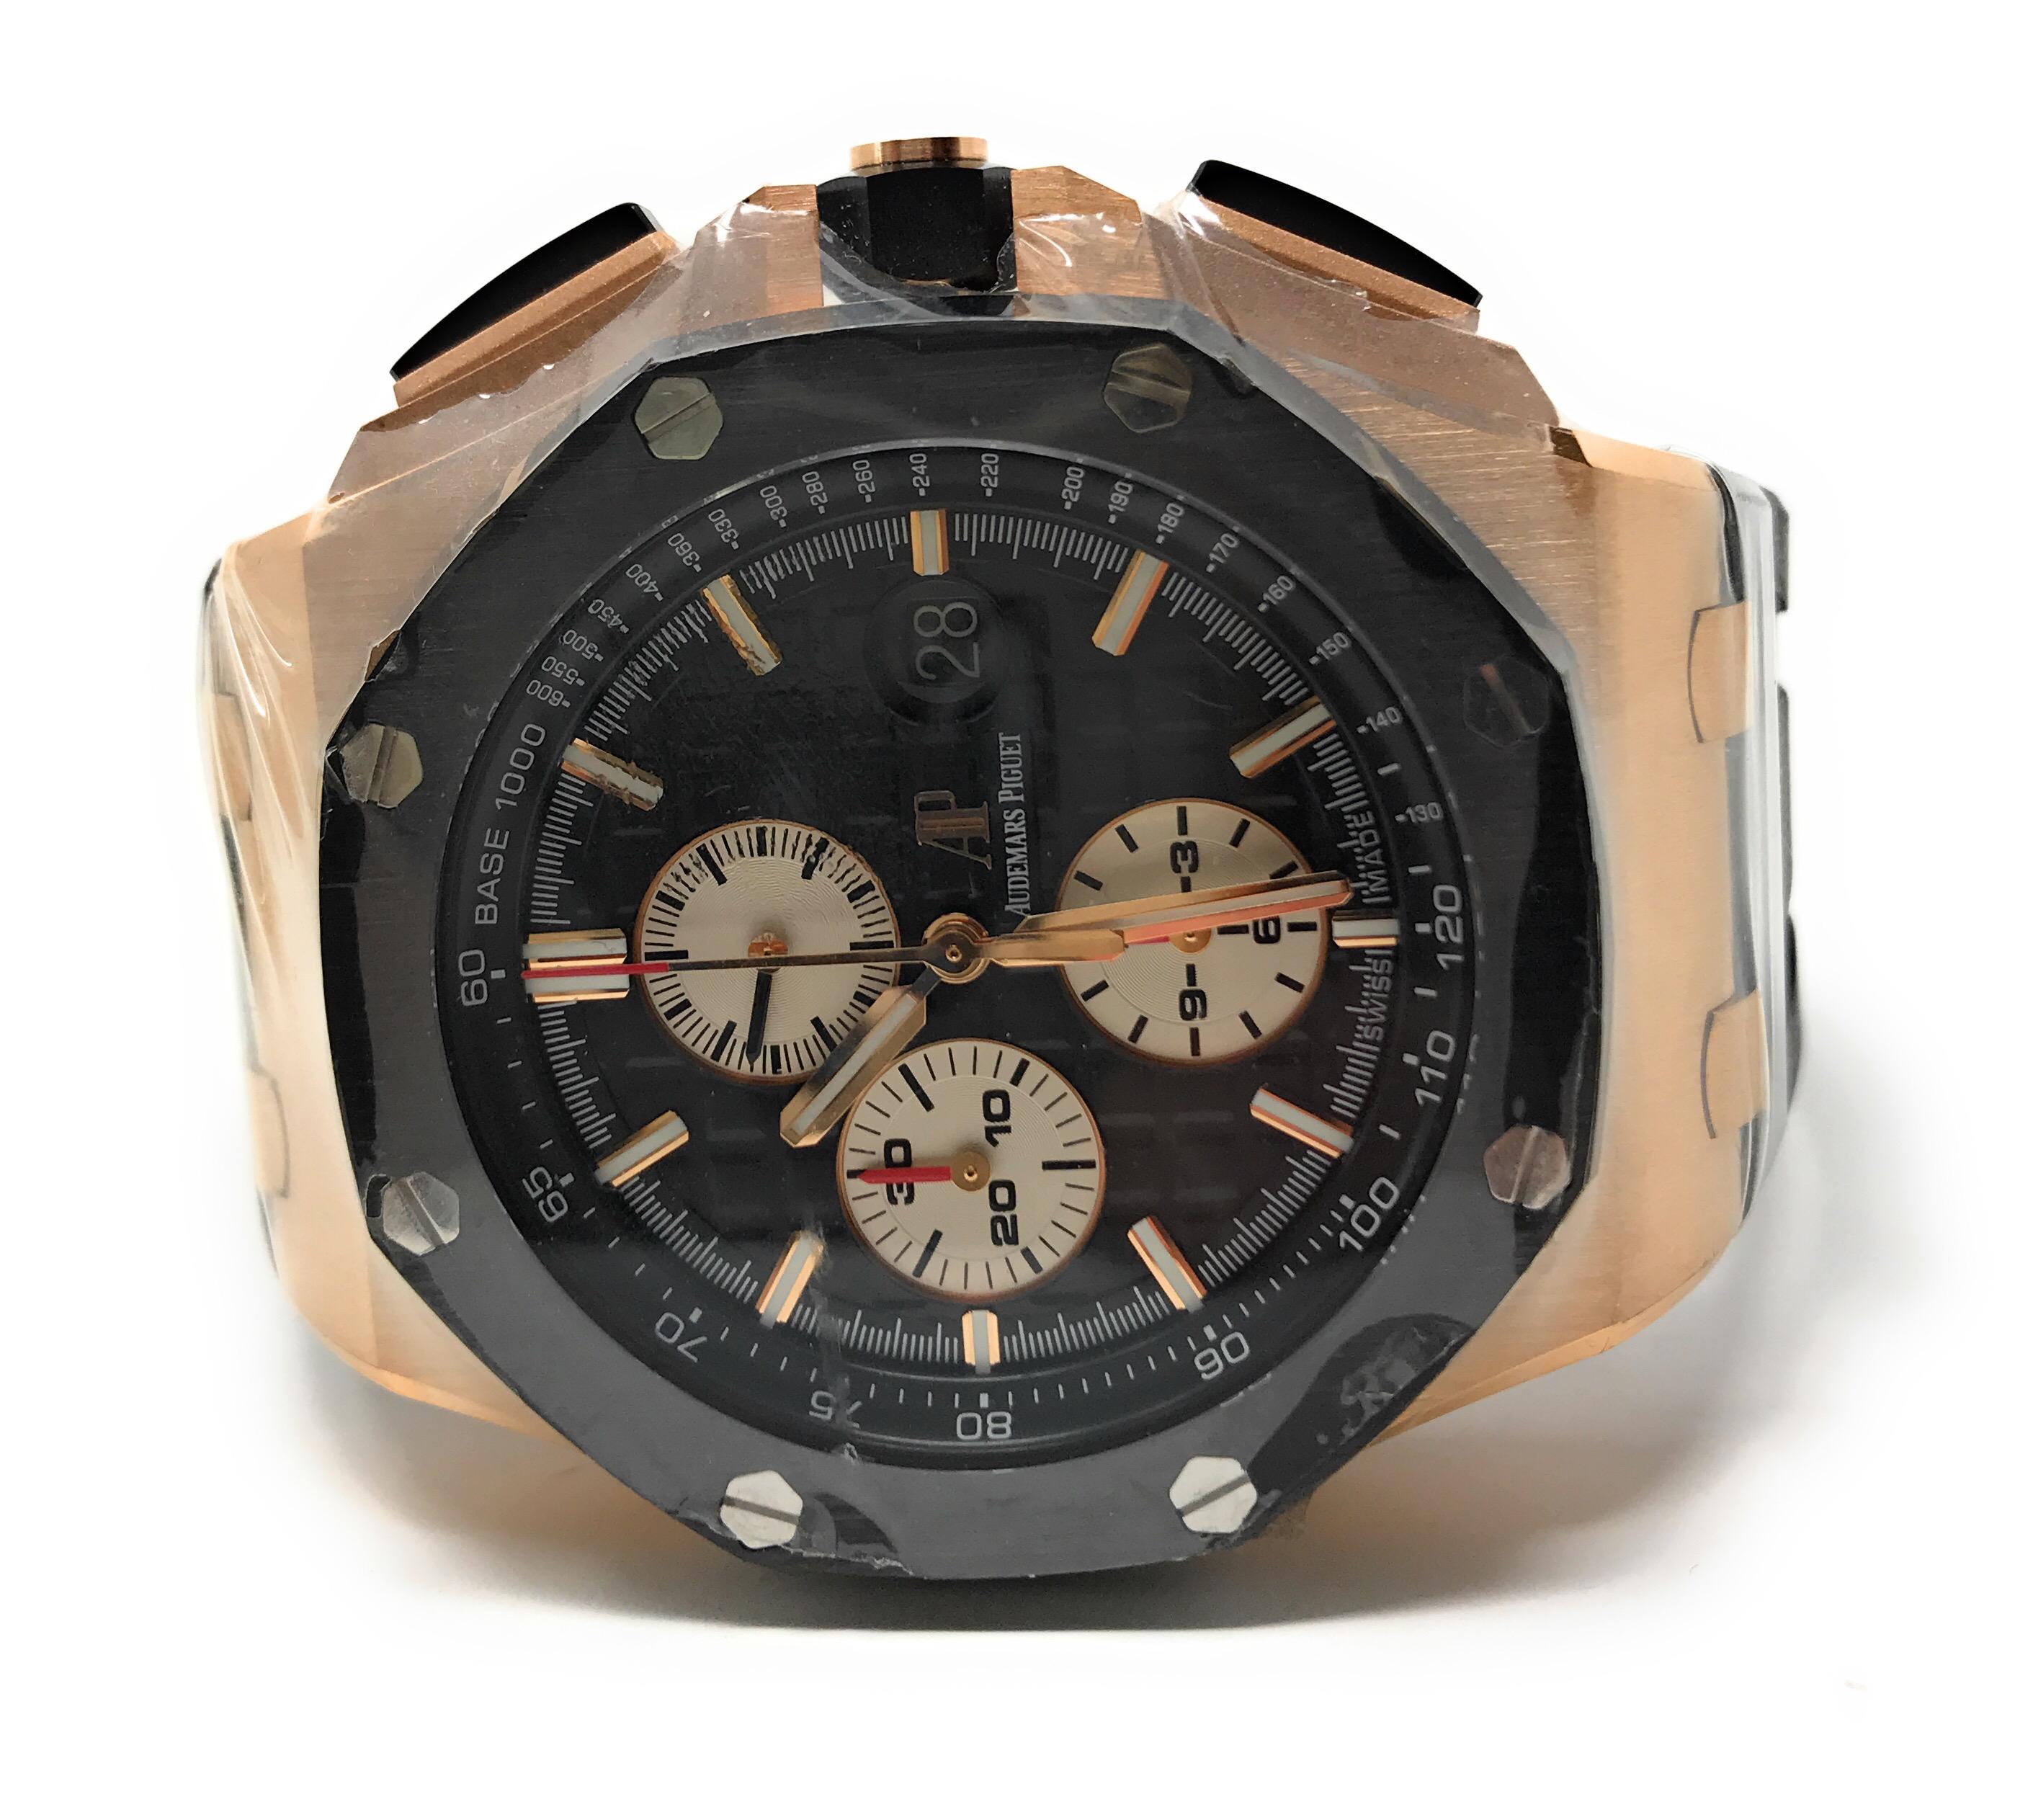 Audemars Piguet Royal Oak Offshore Chronograph In New Condition For Sale In Los Angeles, CA